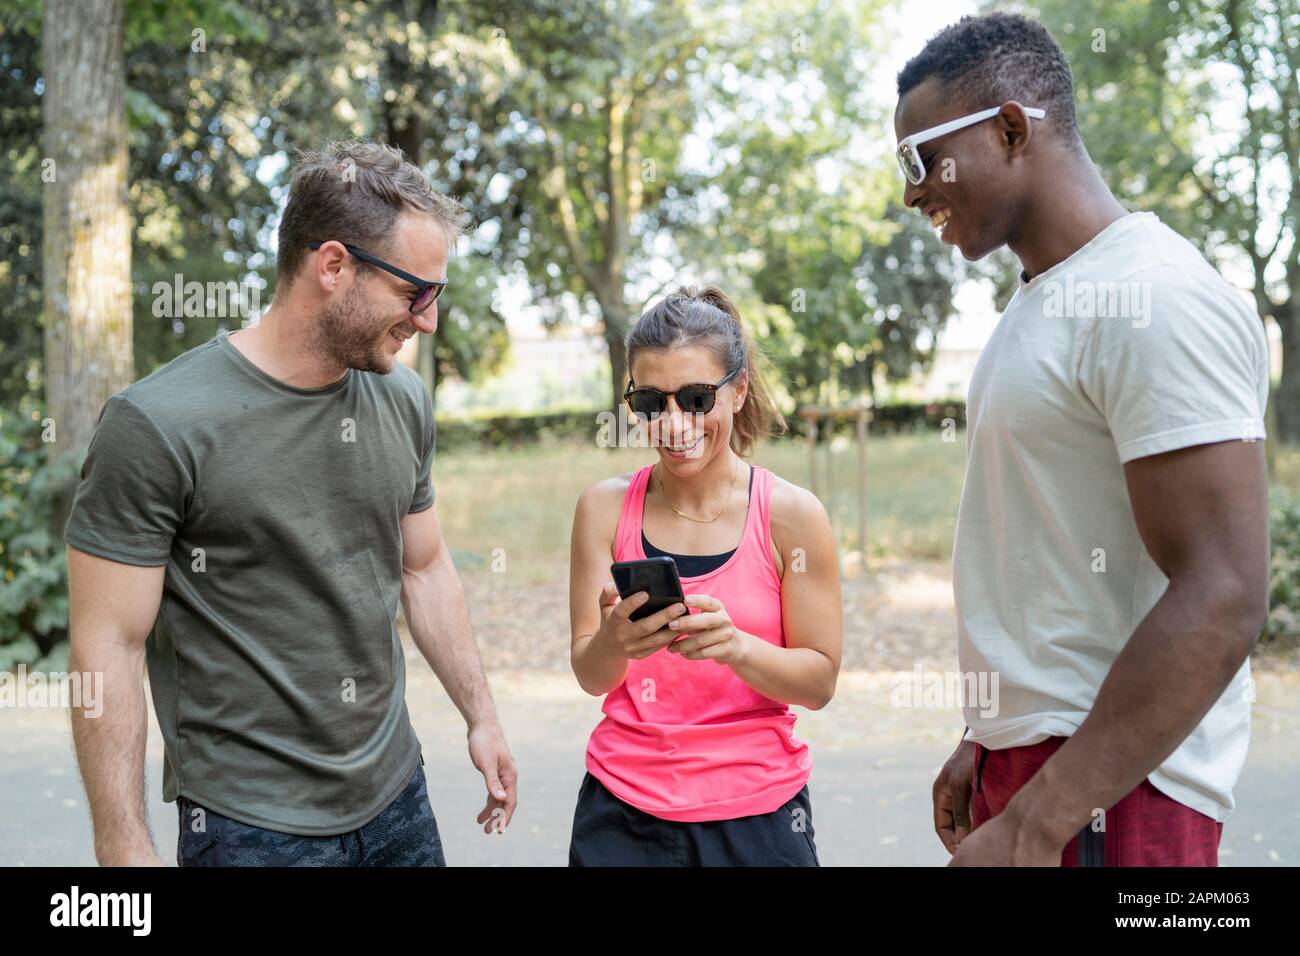 Friends having a break from exercising looking at smartphone Stock Photo